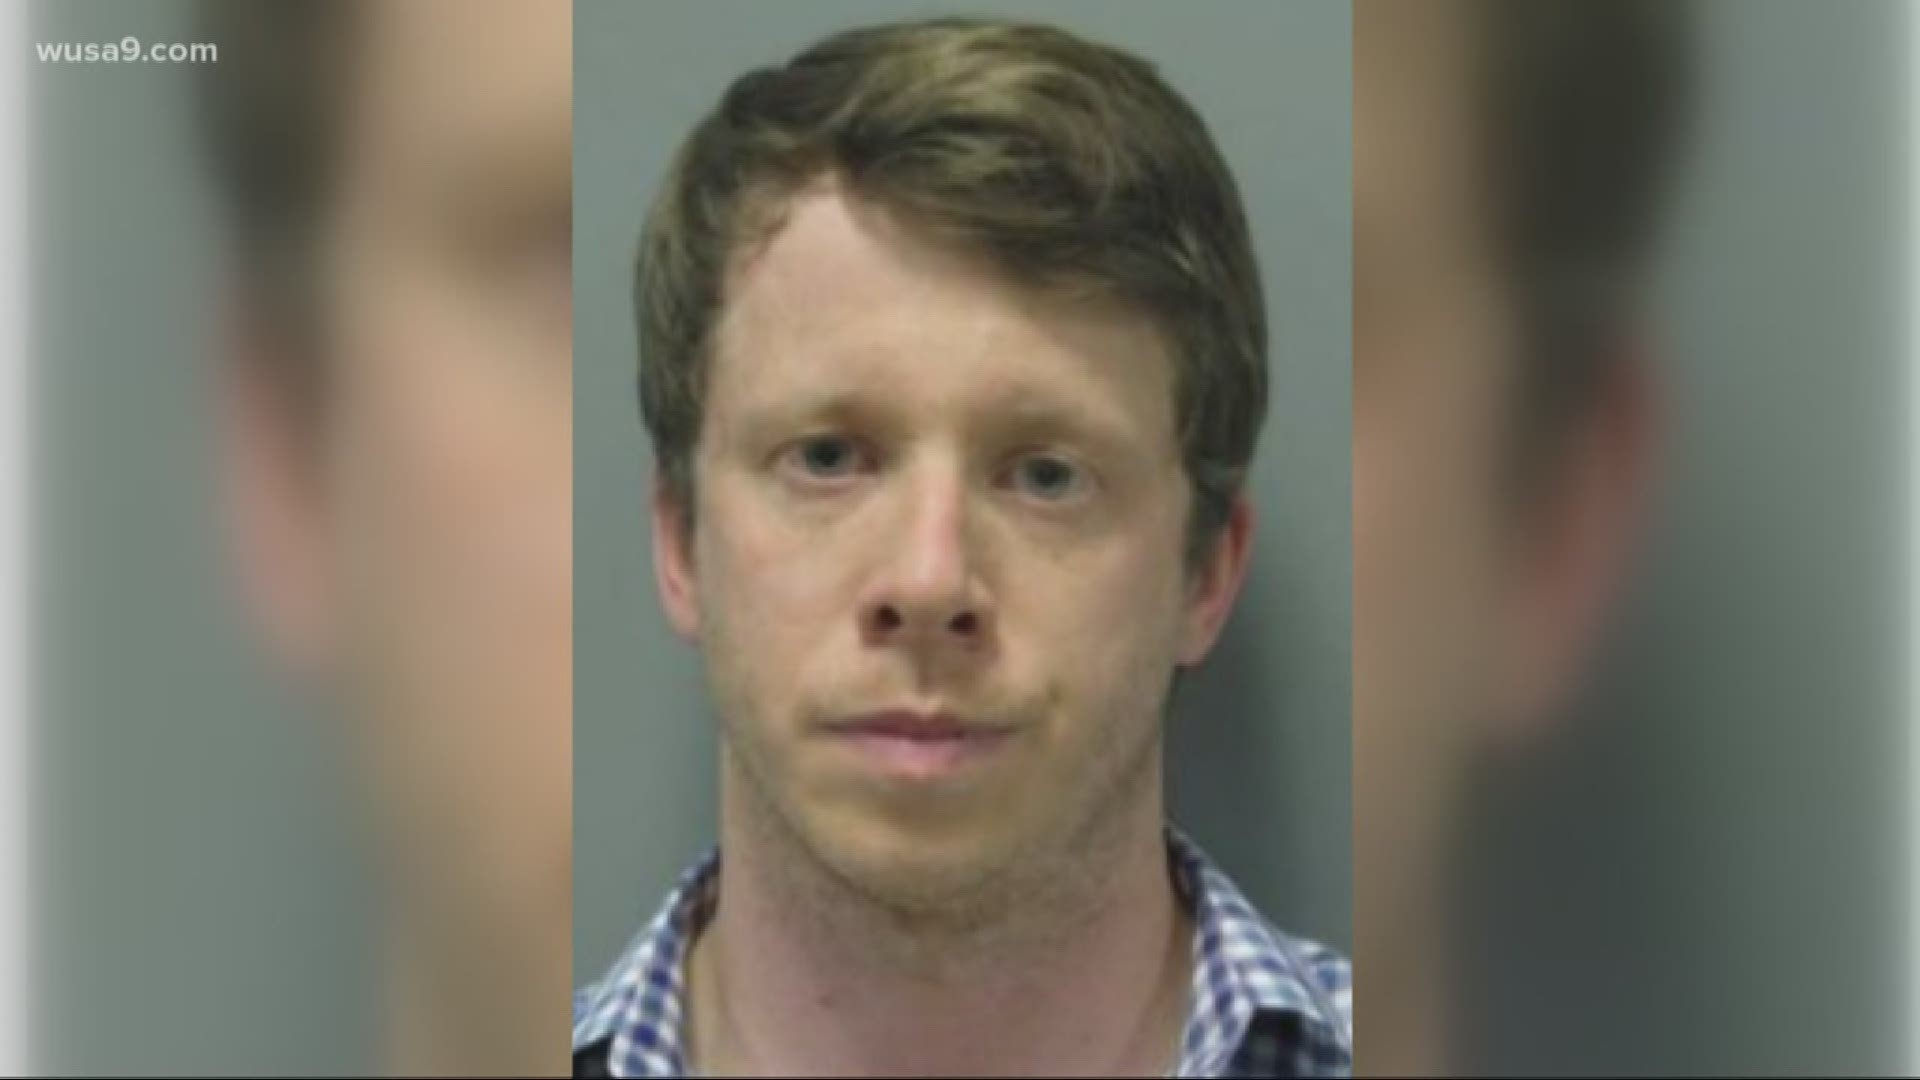 14 Aeyr Garls And Boy Xxx - Maryland man, 32, arrested for having sex with 14-year-old girl, police say  | wusa9.com